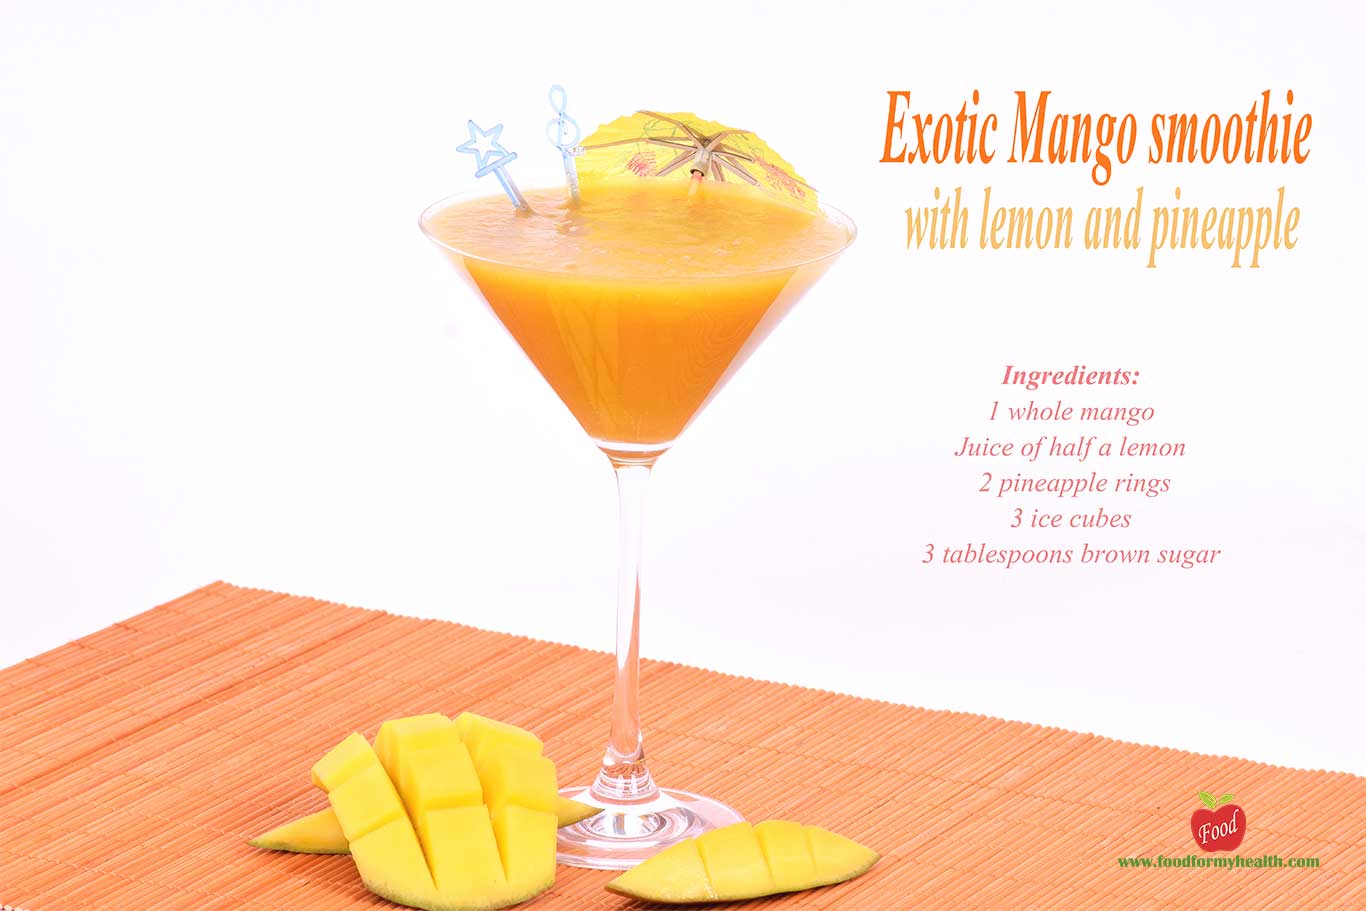 Exotic Mango smoothie with lemon and pineapple